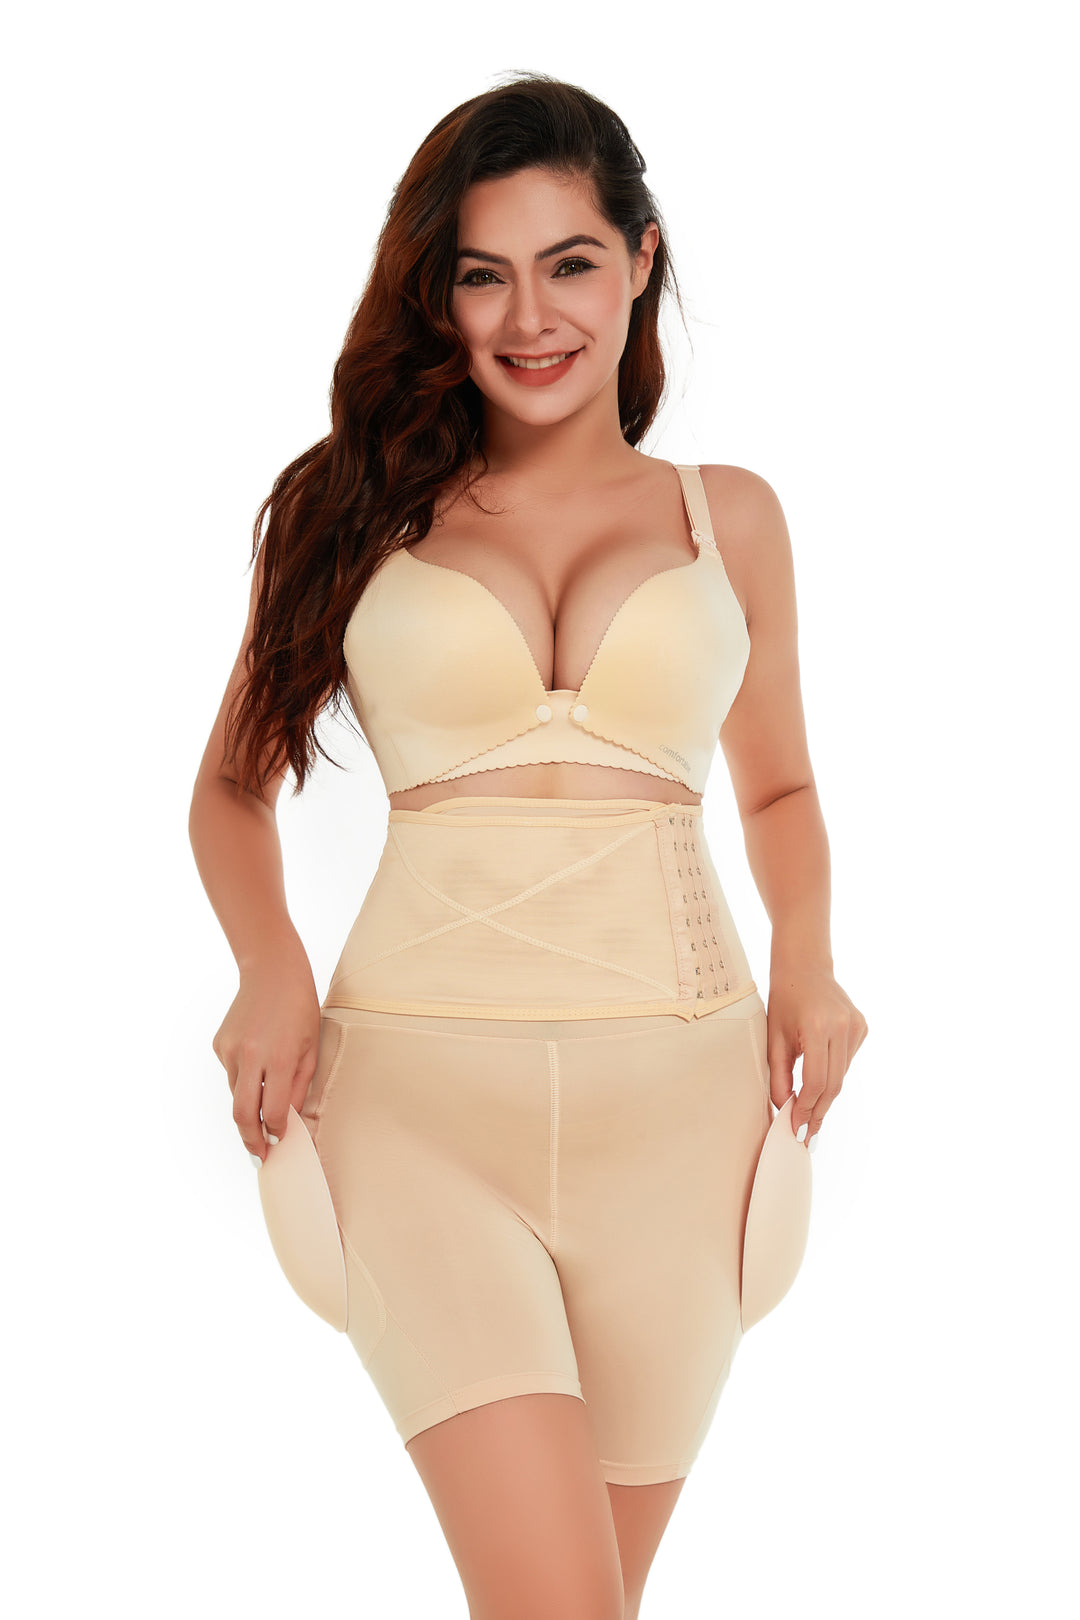 Three Breasted Adjustable High Waist Hip Contracting Underwear Belly Contracting Slimming Pants